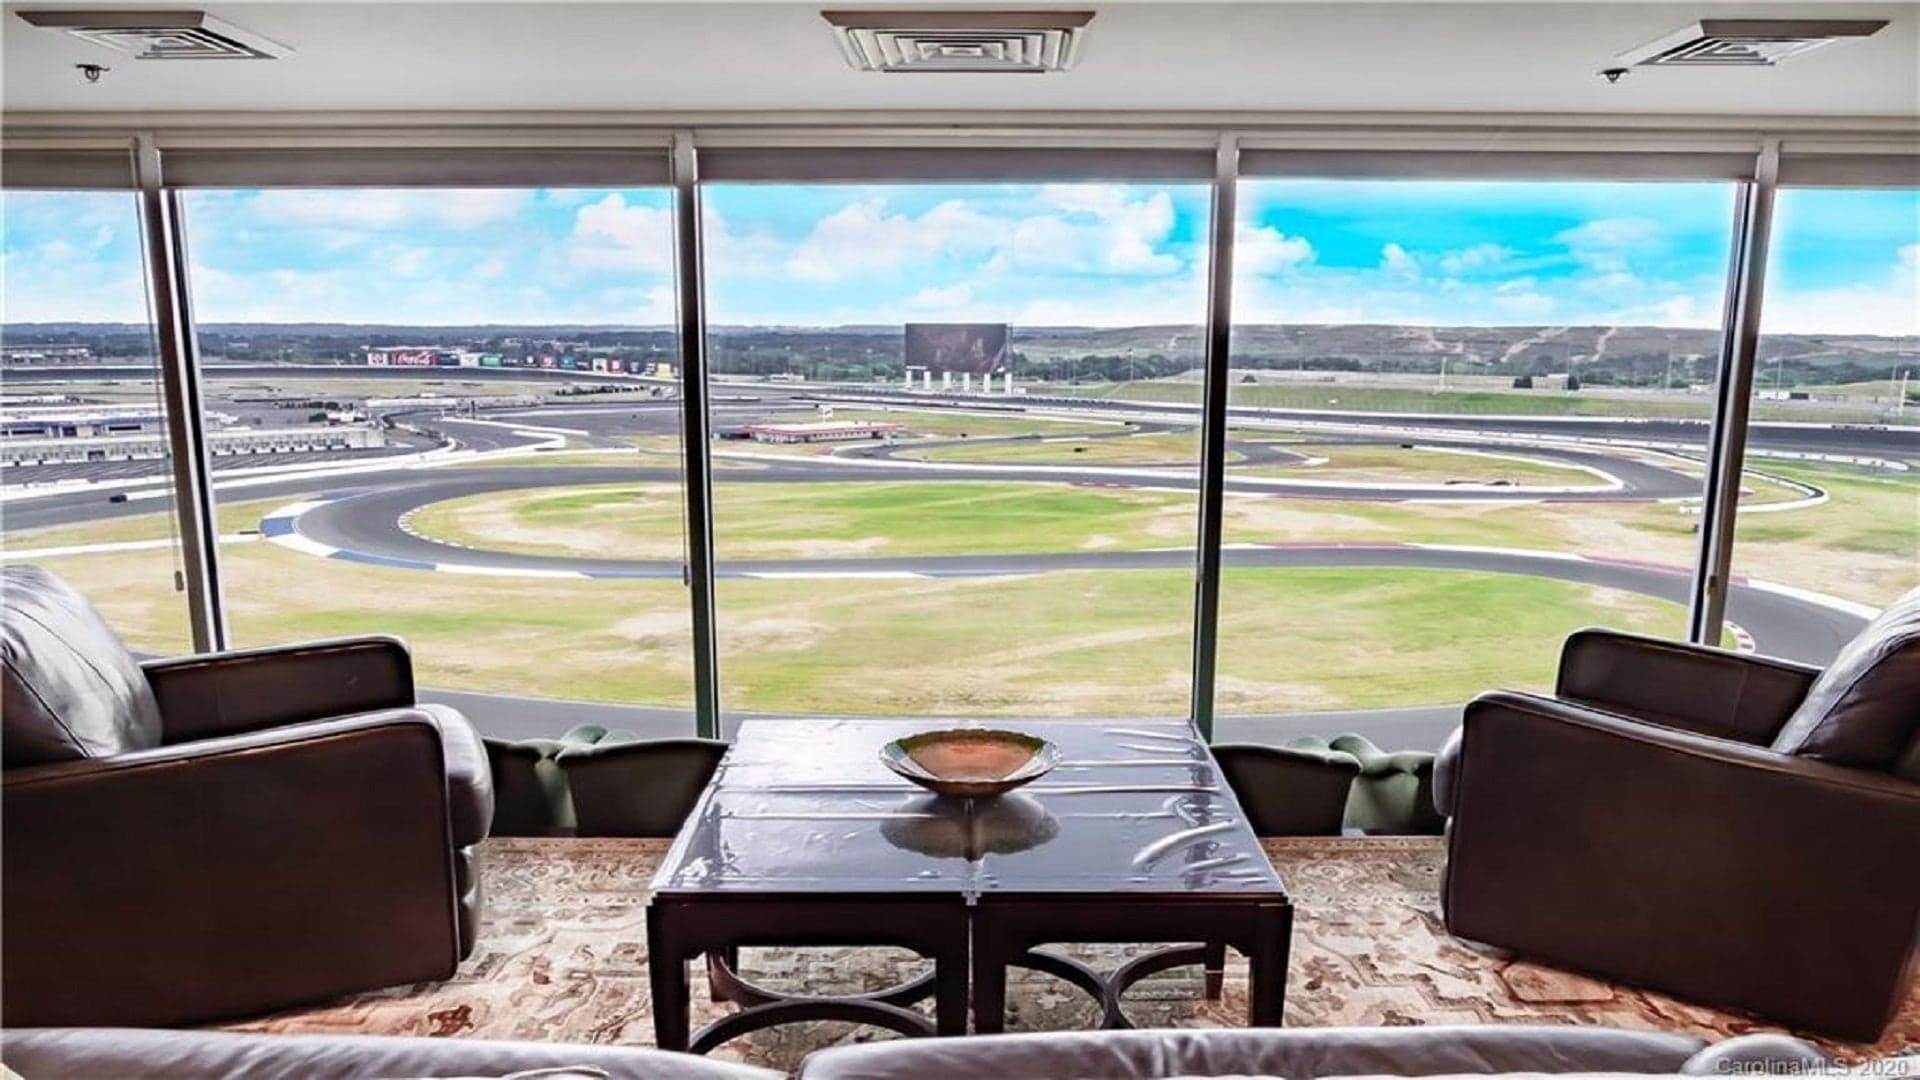 Buy This Two-Bed Condo Above Charlotte Motor Speedway and Never Leave the Track Again